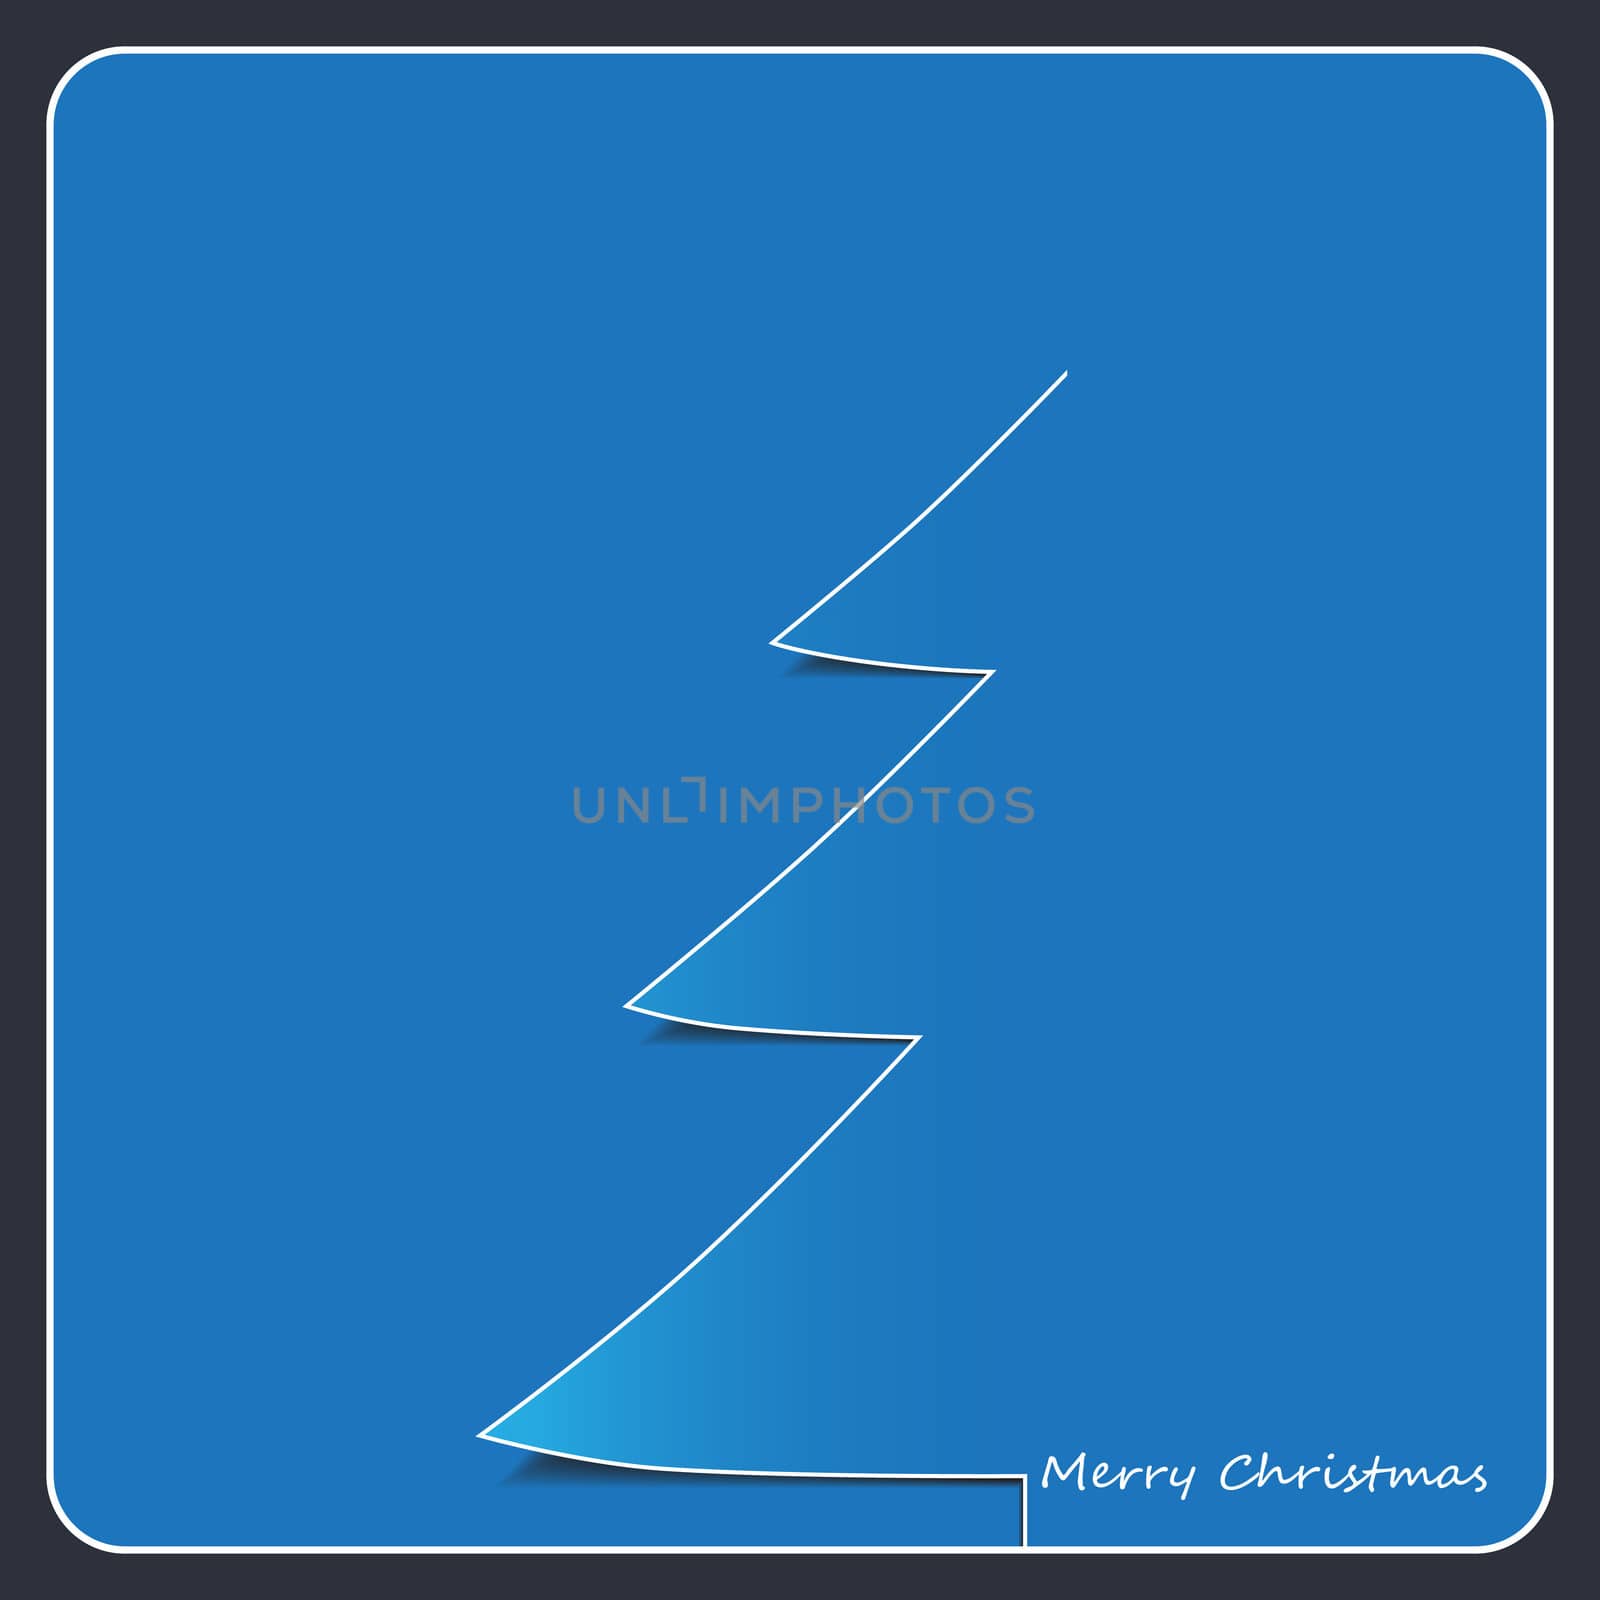 new abstract image of christmas tree shape on blue paper